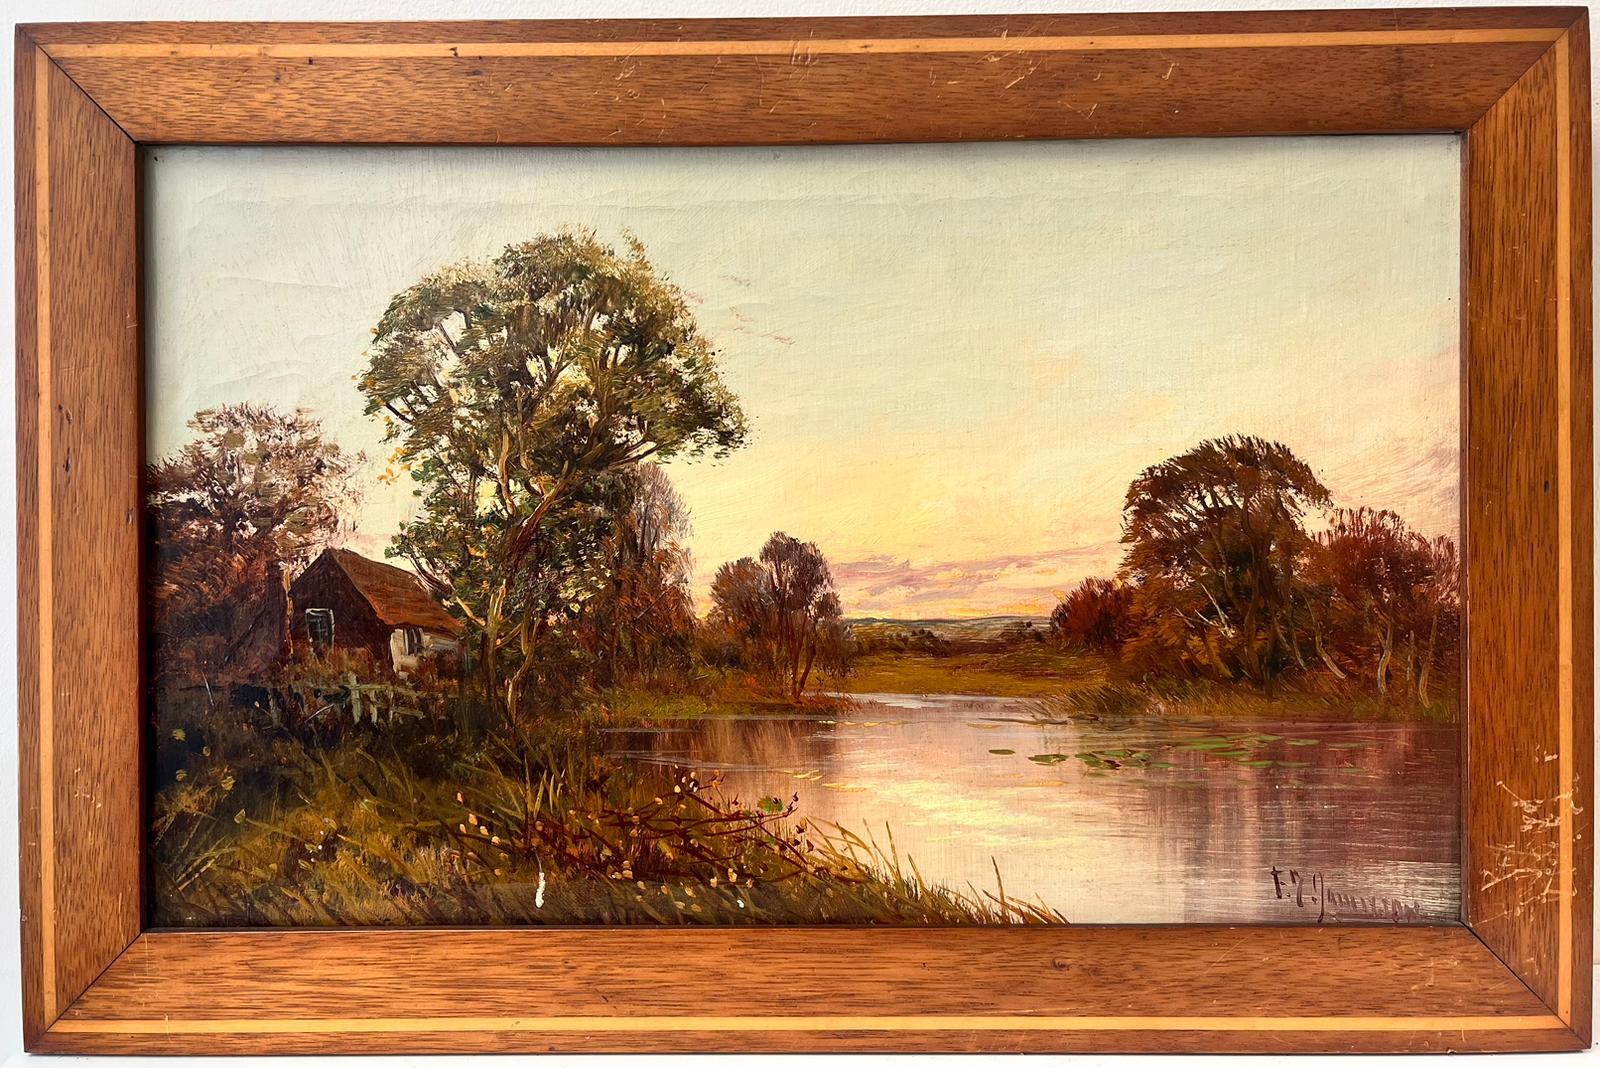 Artist/ School: F. E. Jamieson British 1895-1950, signed

Title: river landscape, Ayr, Scotland

Medium: signed oil on canvas, framed

Size:
framed: 15 x 23 inches
canvas : 12 x 20 inches

Provenance: from a collection in England. 

Condition: The